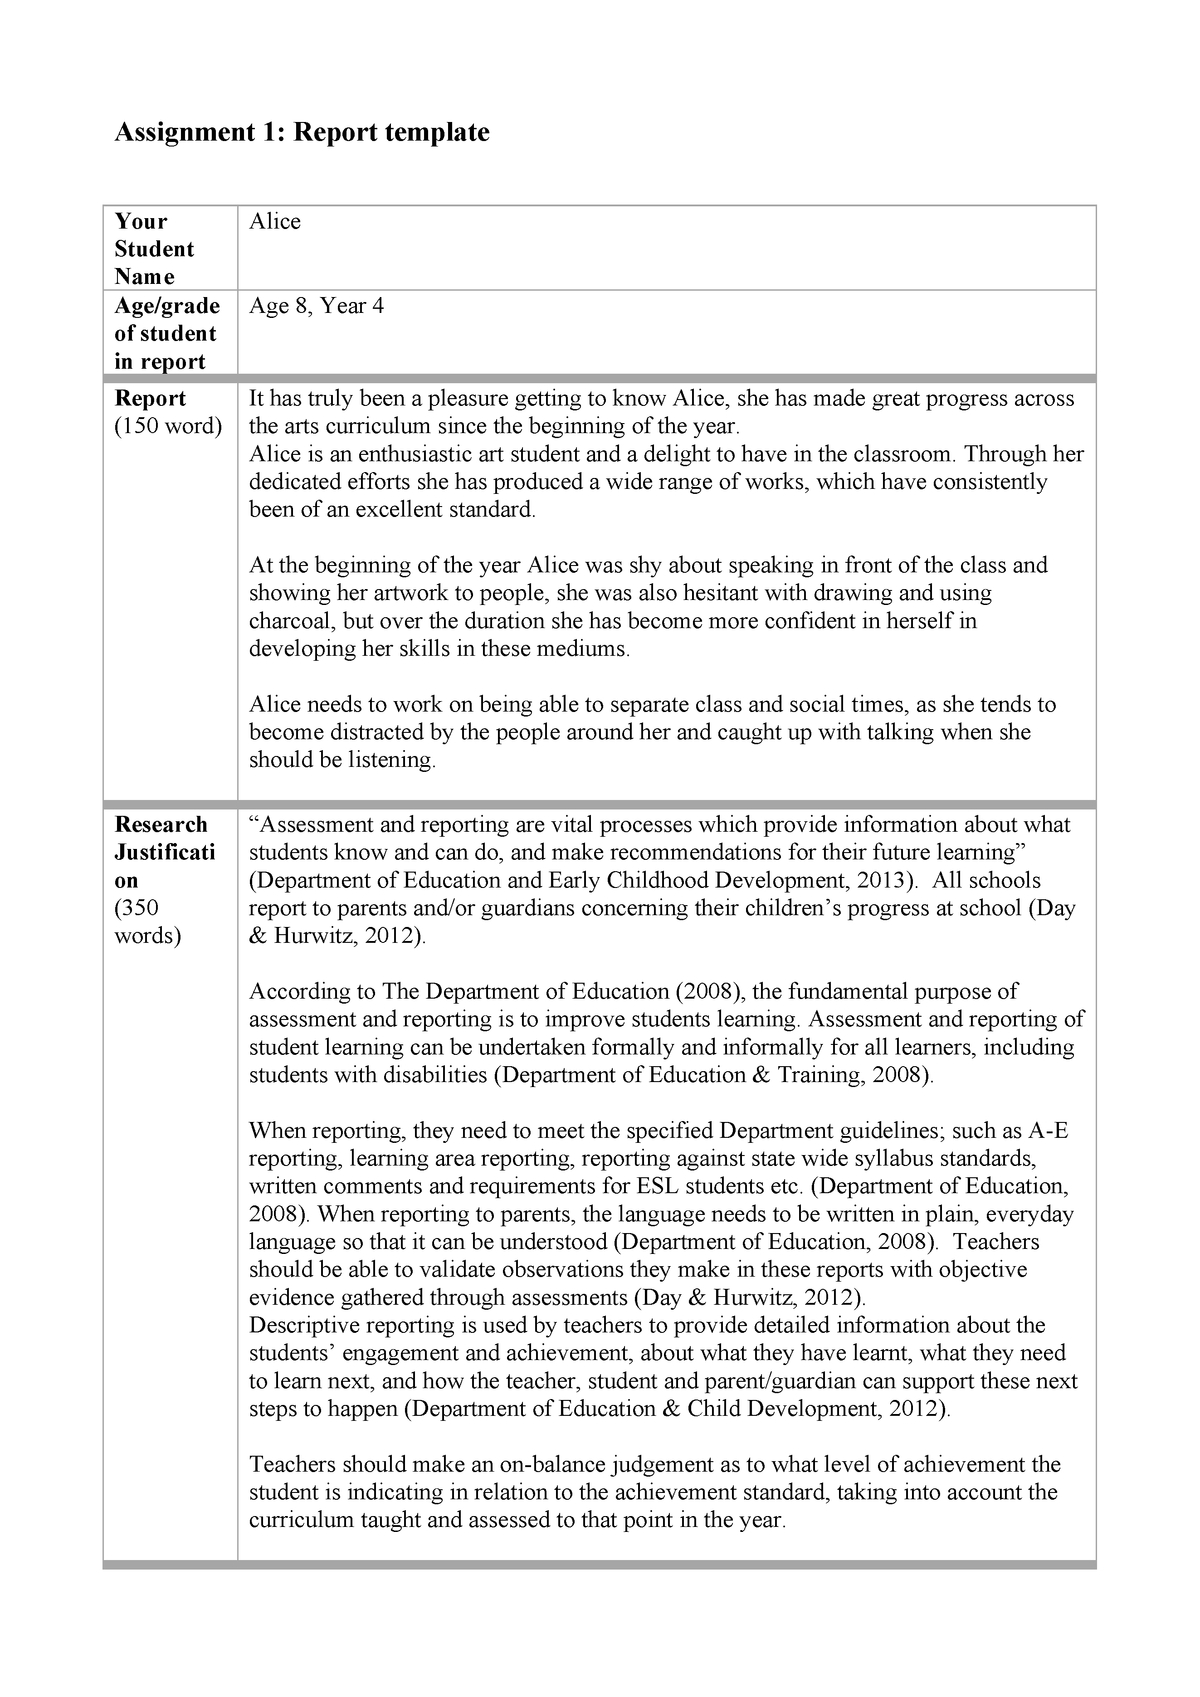 Report Template – Assignment – 6890 Arts Education 2 – Uc Within Assignment Report Template